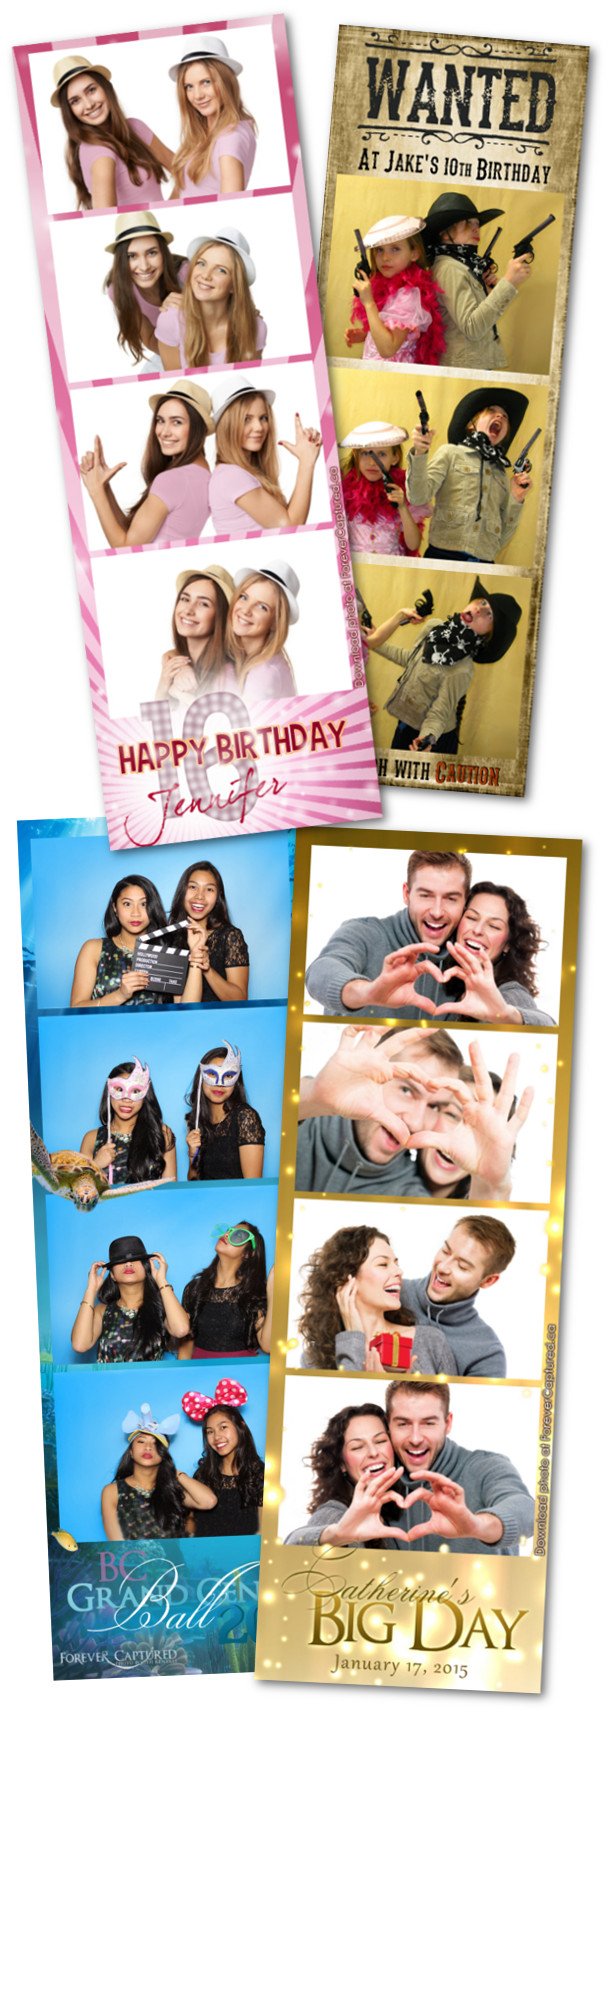 Photobooth rentals for parties, weddings, and events in BC.